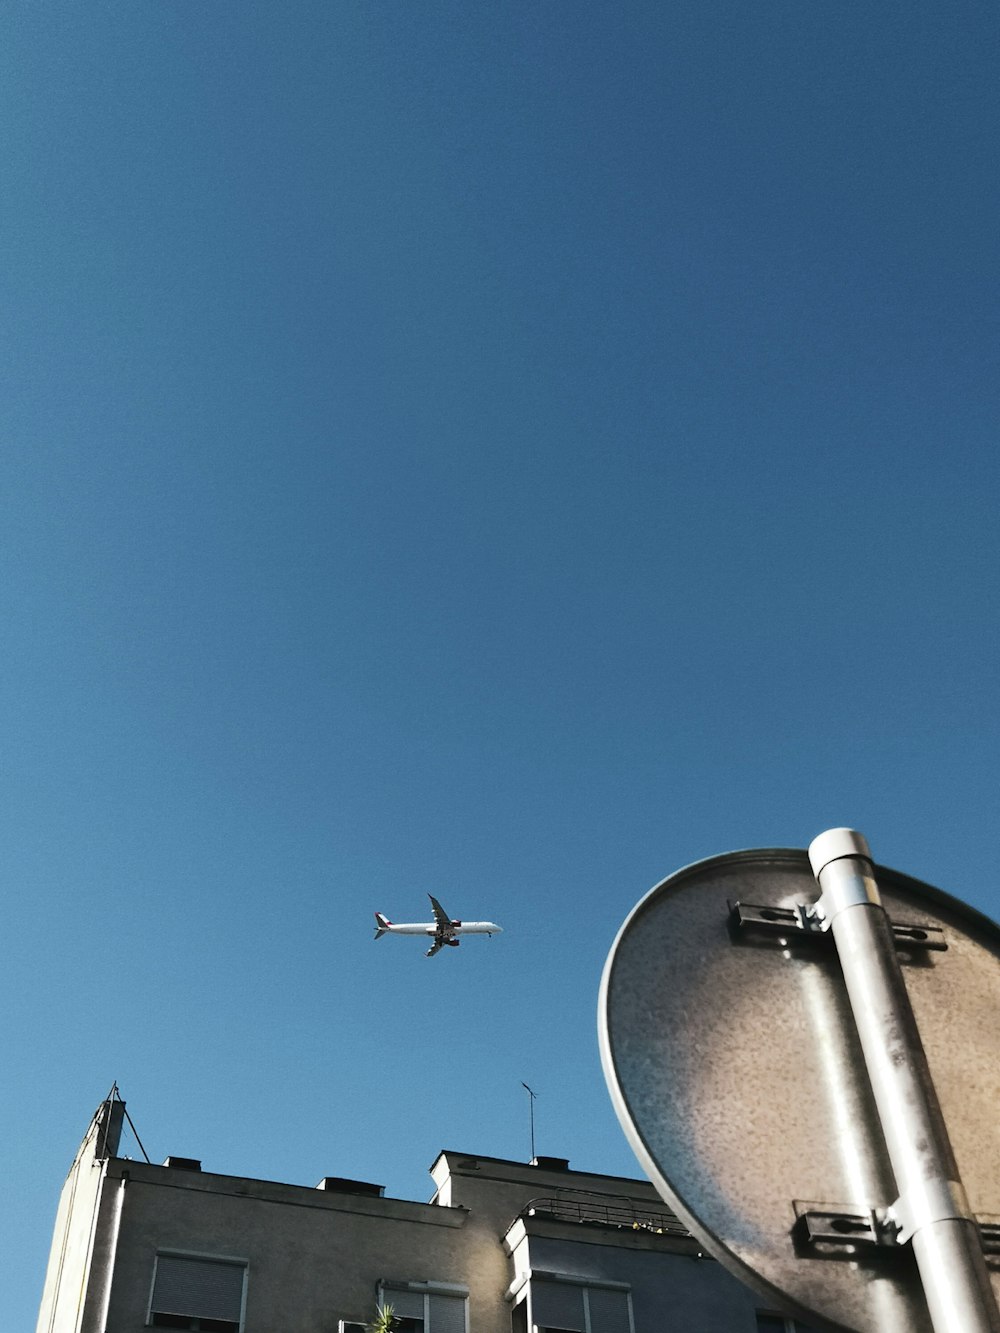 photography of airplane in flight during daytime